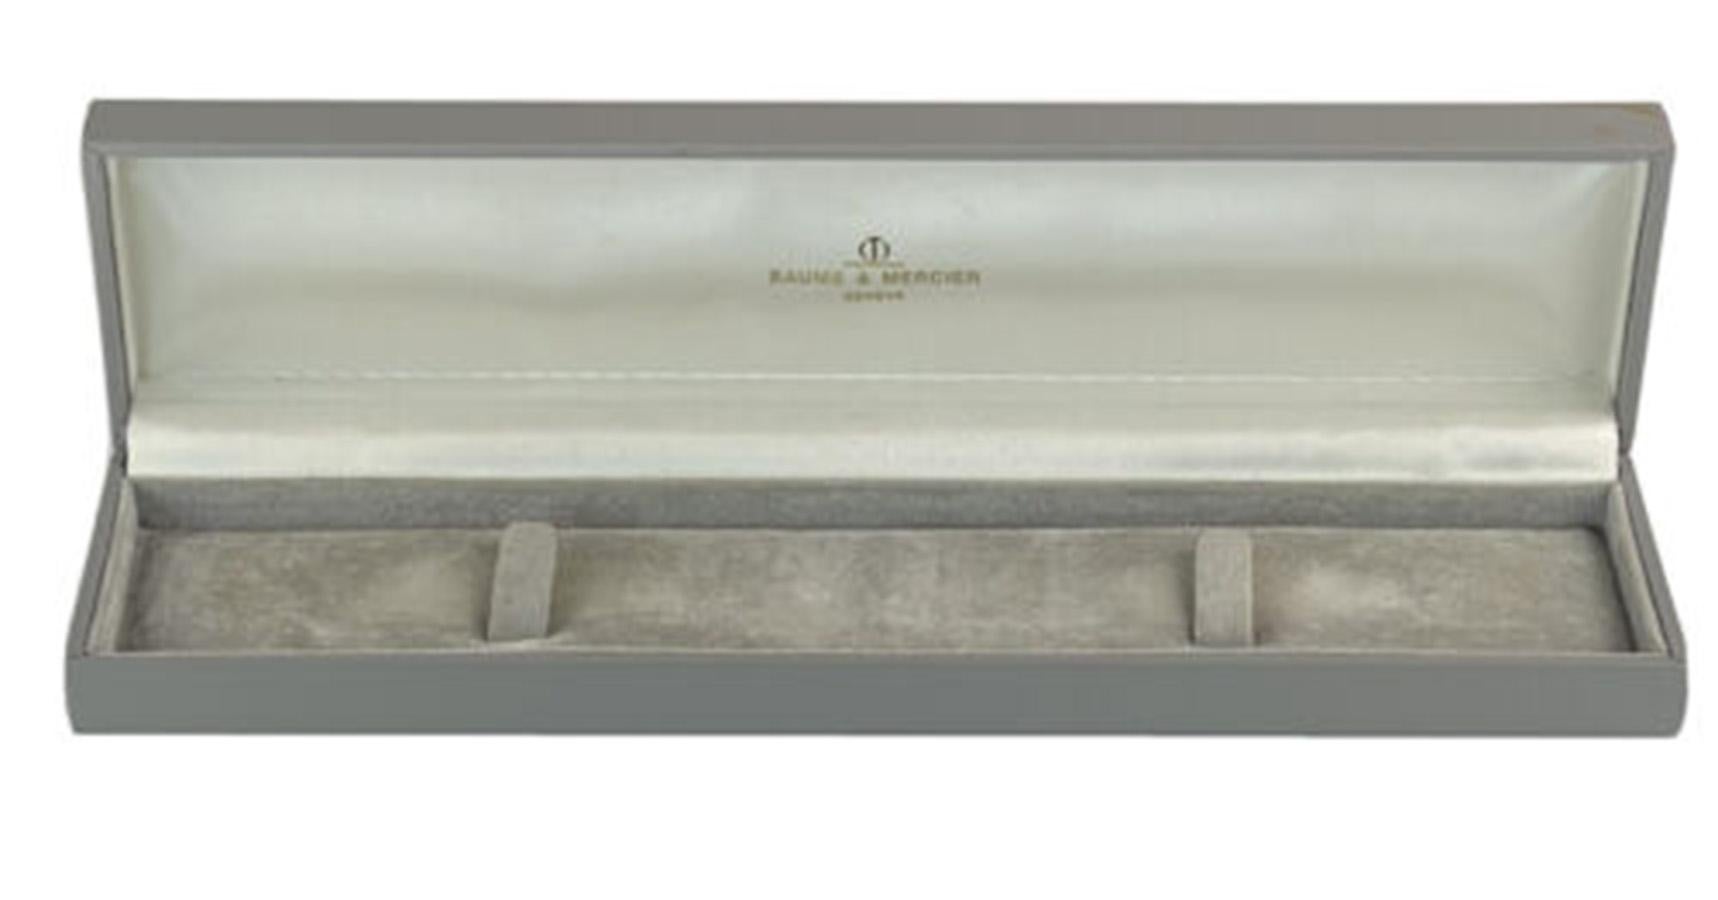 Late 20th Century Baume & Mercier Geneve Watch Display Box For Sale